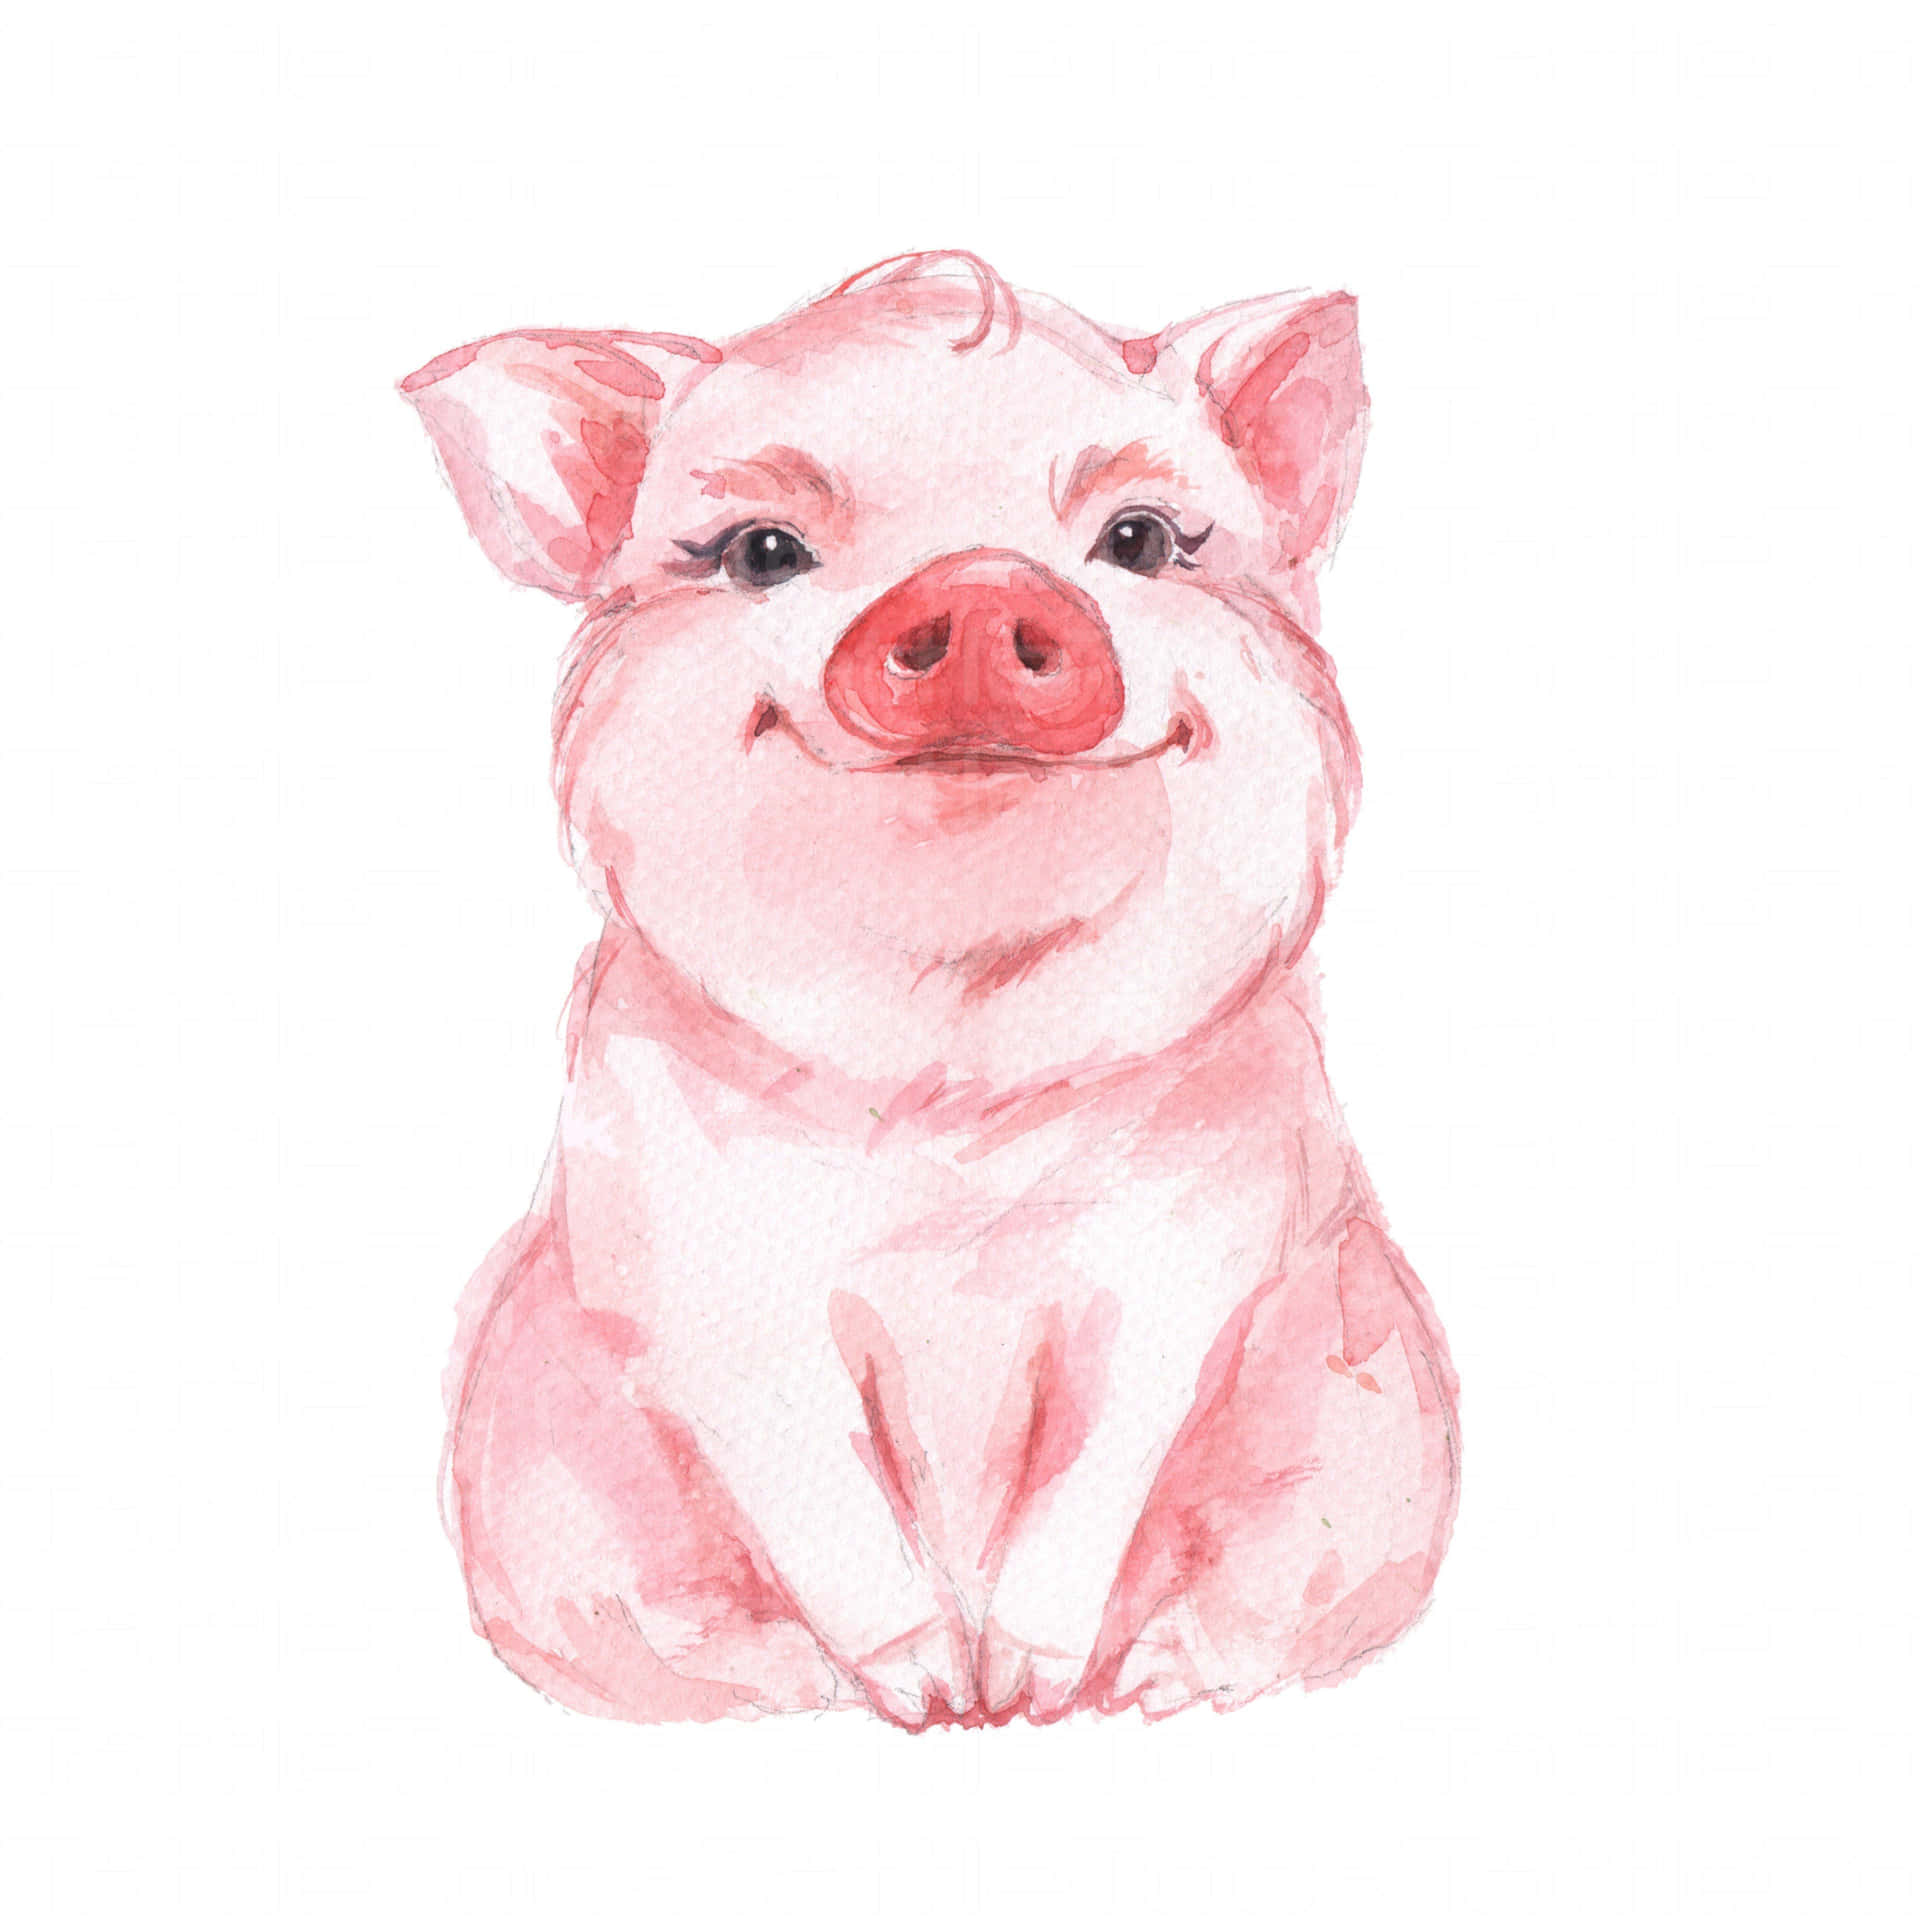 This Adorable Piggy is Ready for Cuddles